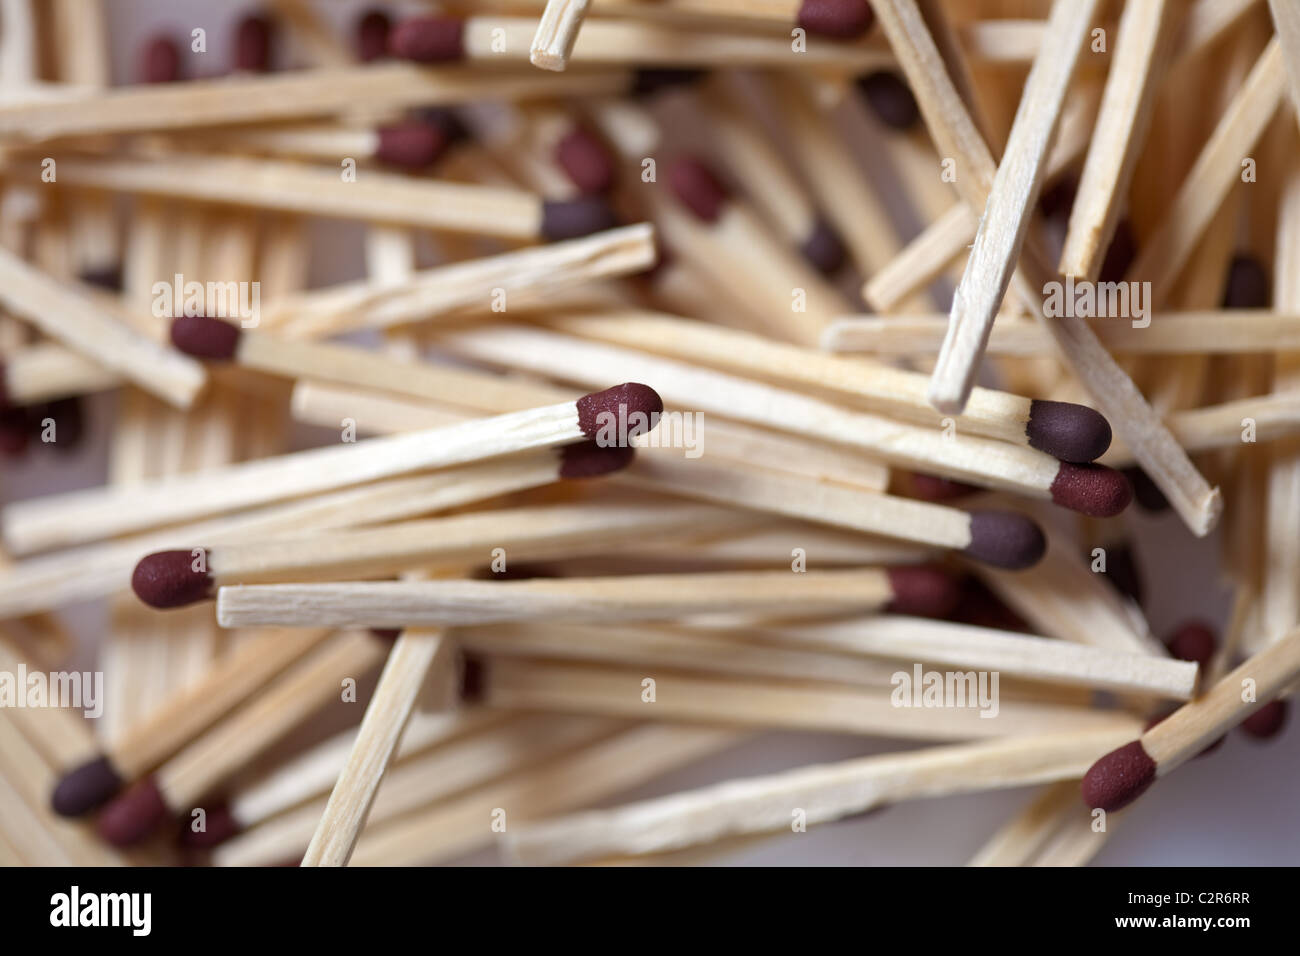 Pile of Matches Stock Photo